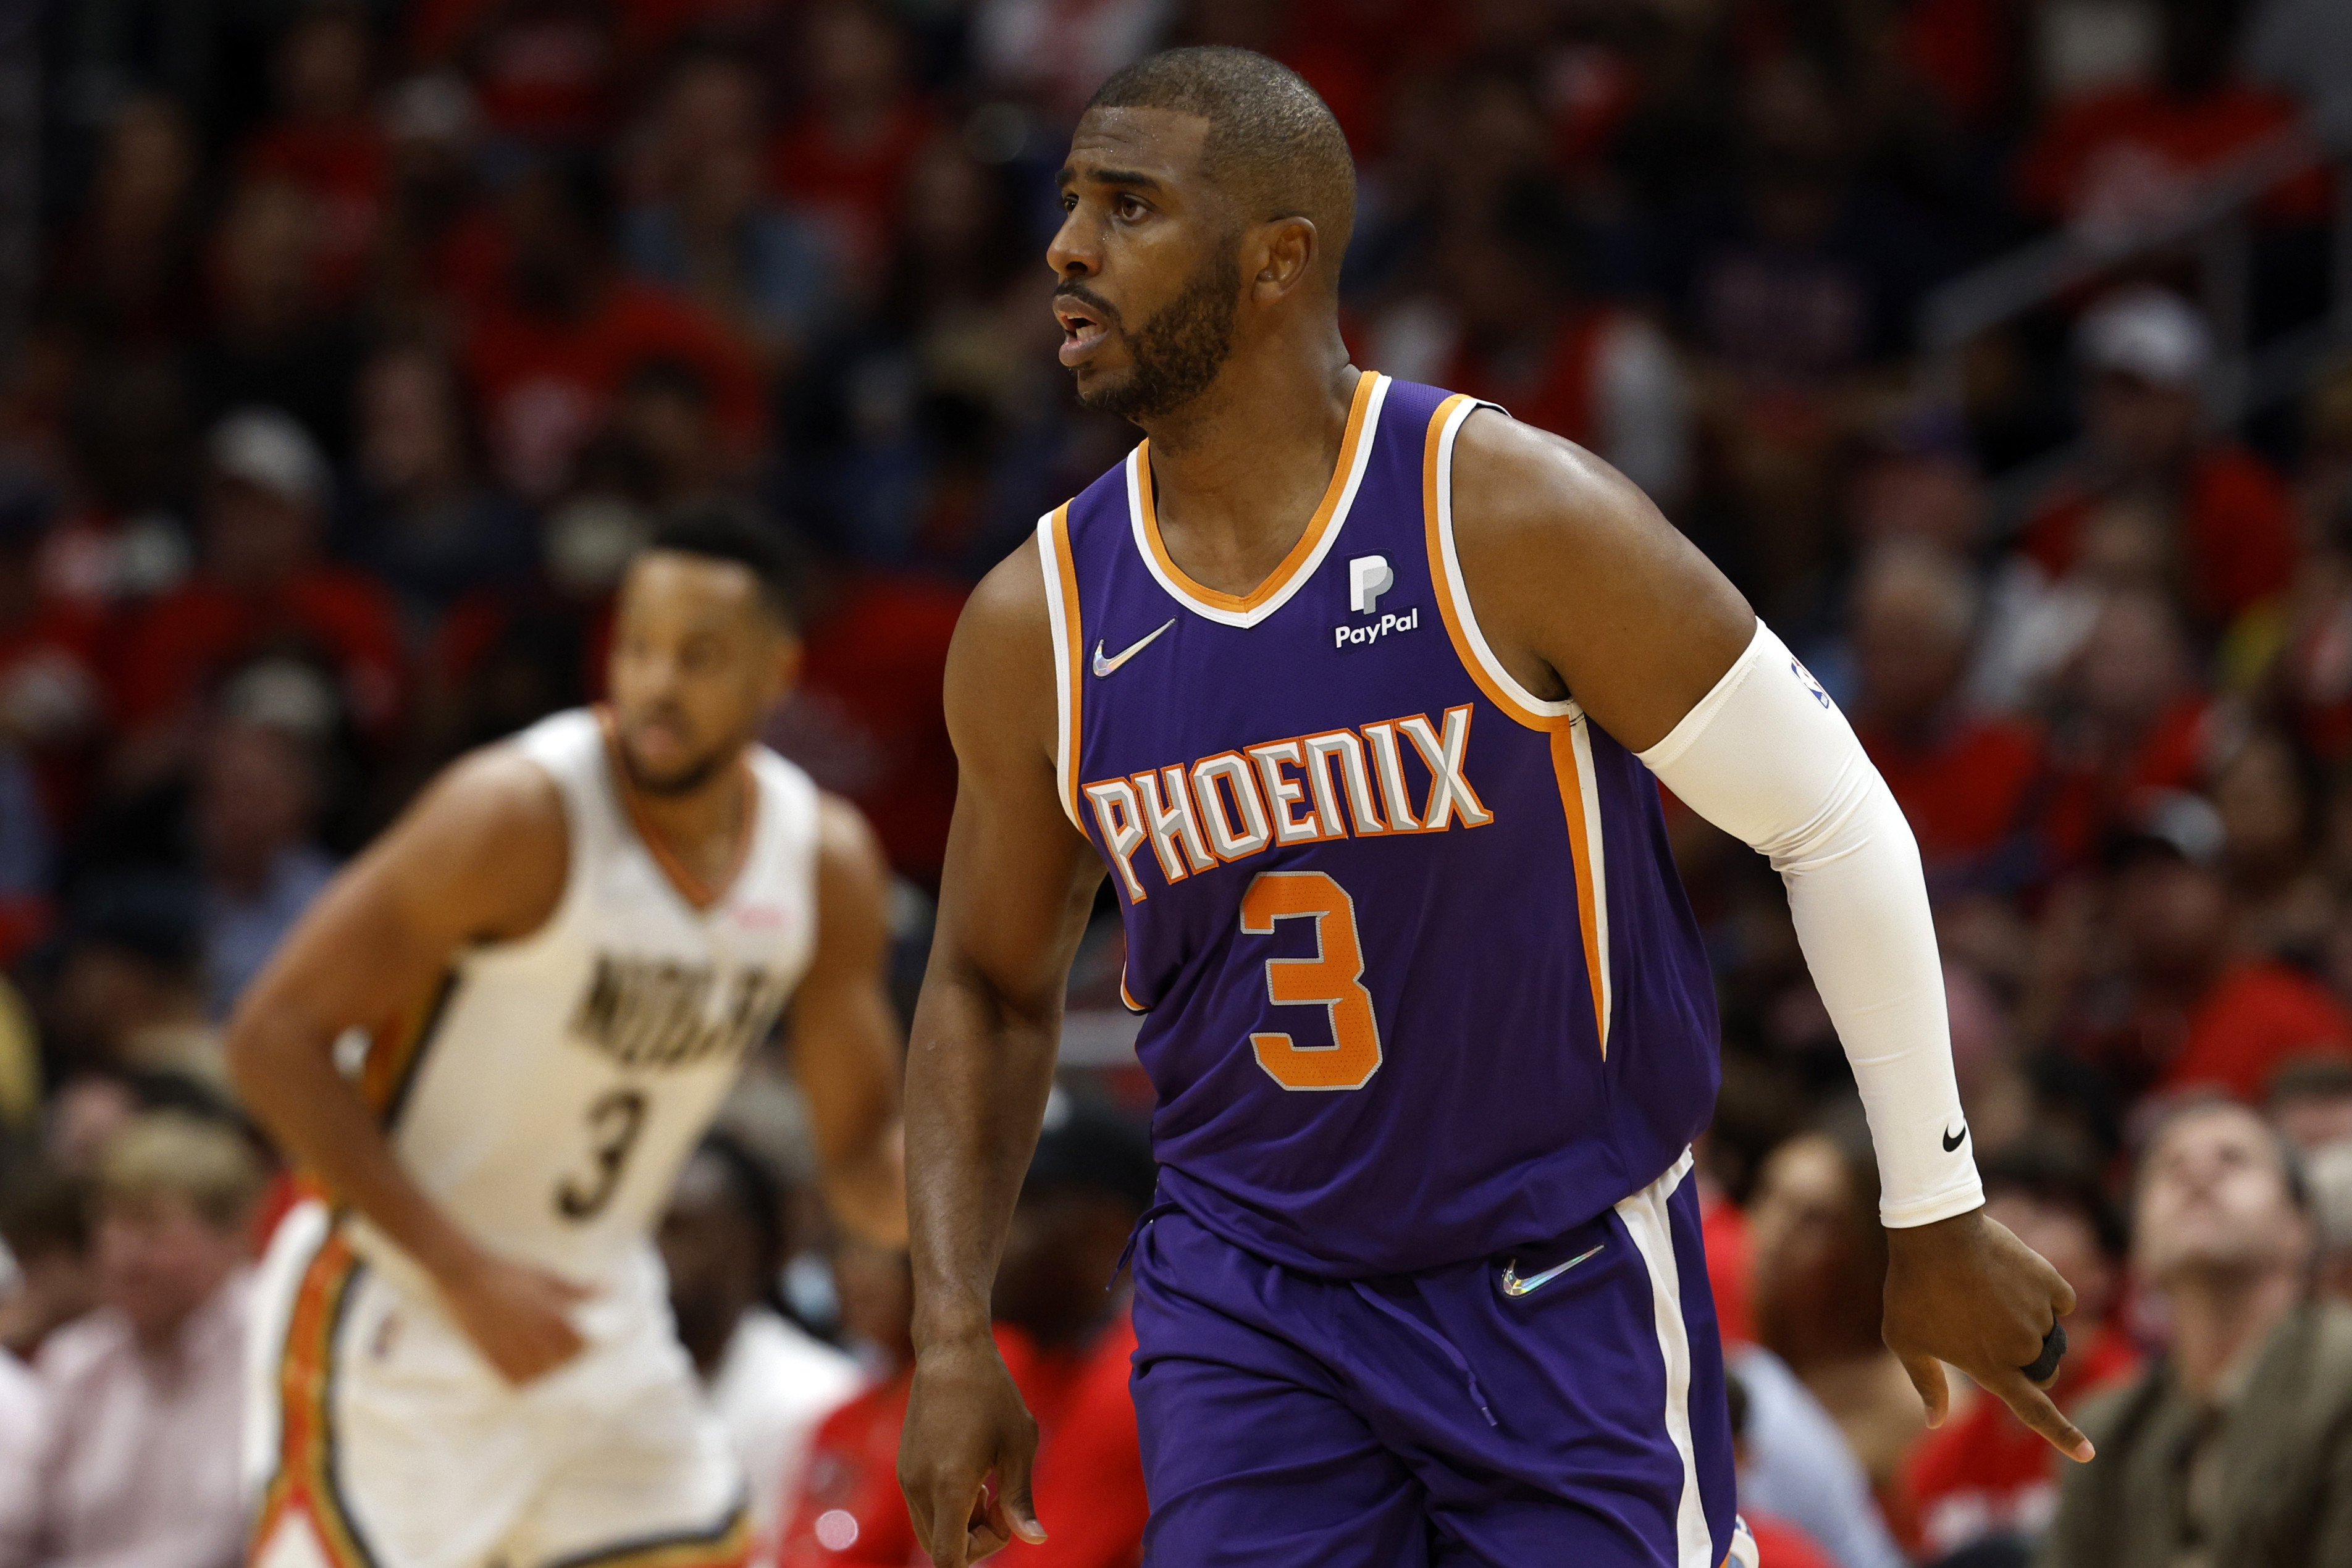 Perfect Paul, top-seeded Suns finish off Pelicans in Game 6